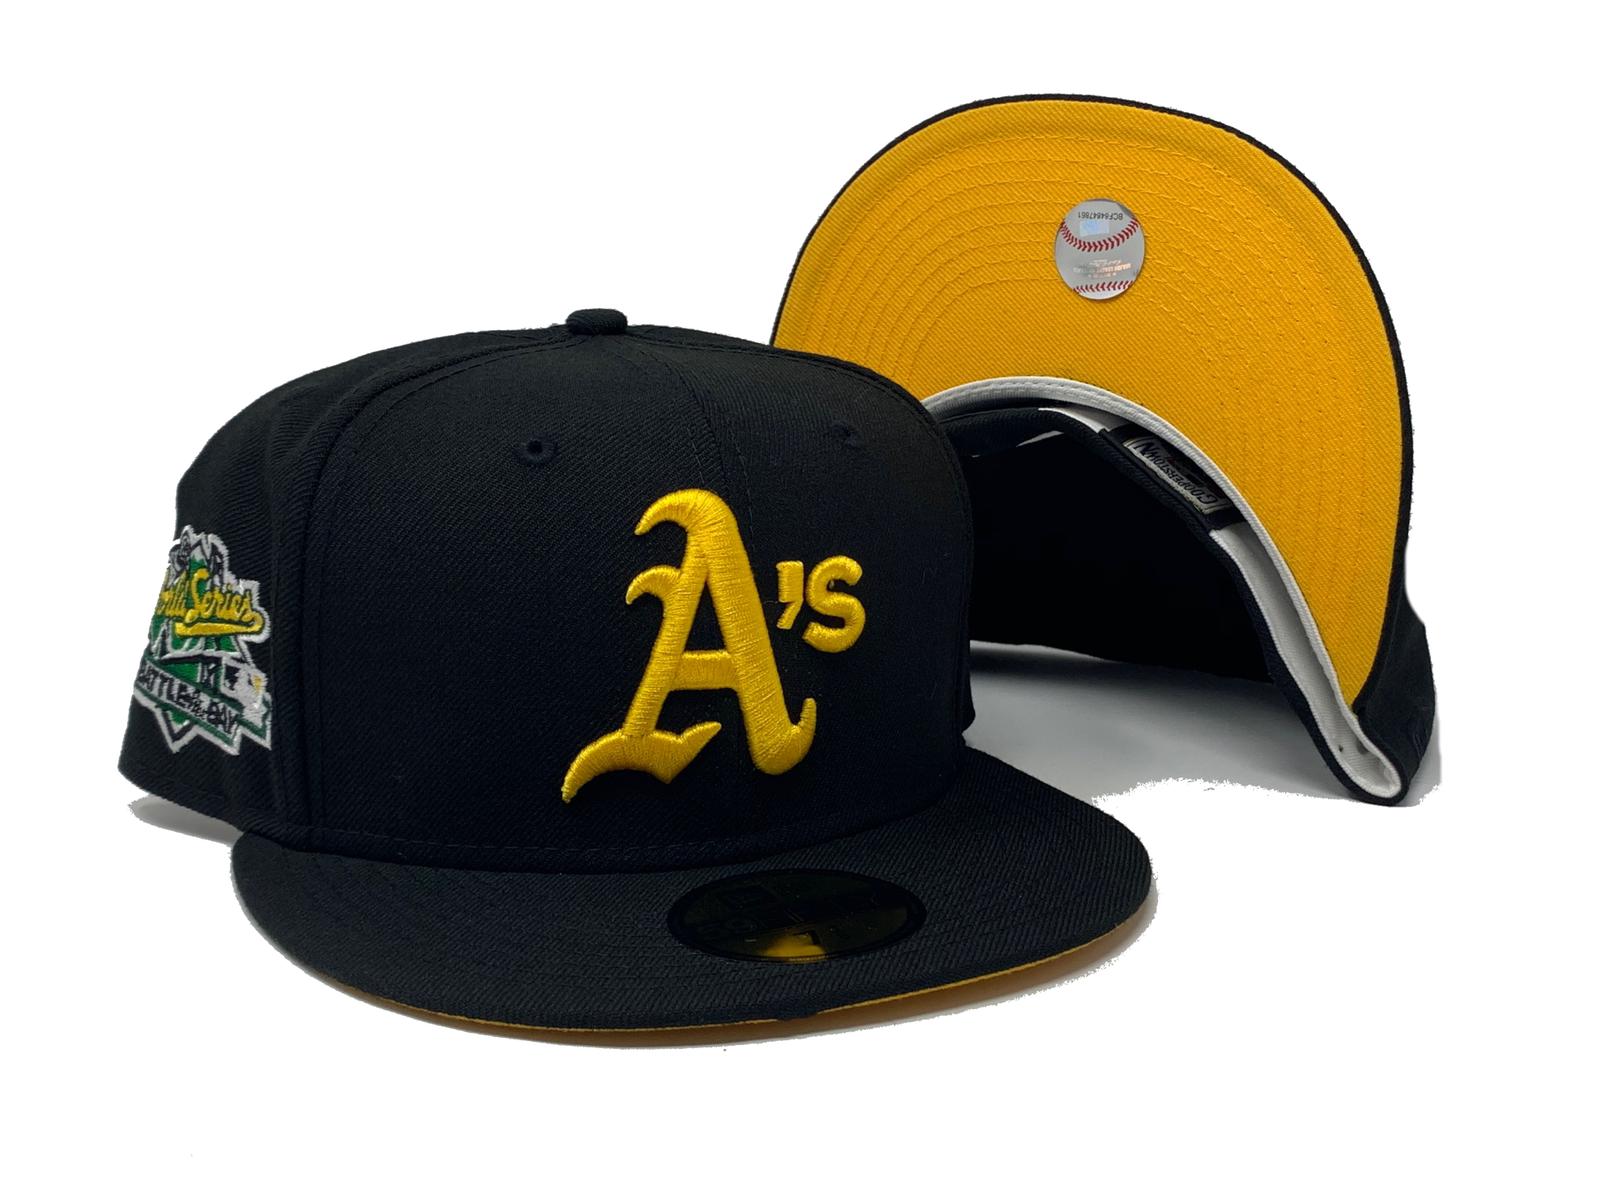 Oakland Athletics 1989 World Series New Era 59Fifty Fitted Hat (BATTLE OF  THE BAY GREEN UNDER BRIM)  1989 Patch:  athletics-1989-world-series-new-era-59fifty-fitted-hat-green-under-brim.html  BATTLE OF THE BAY Patch